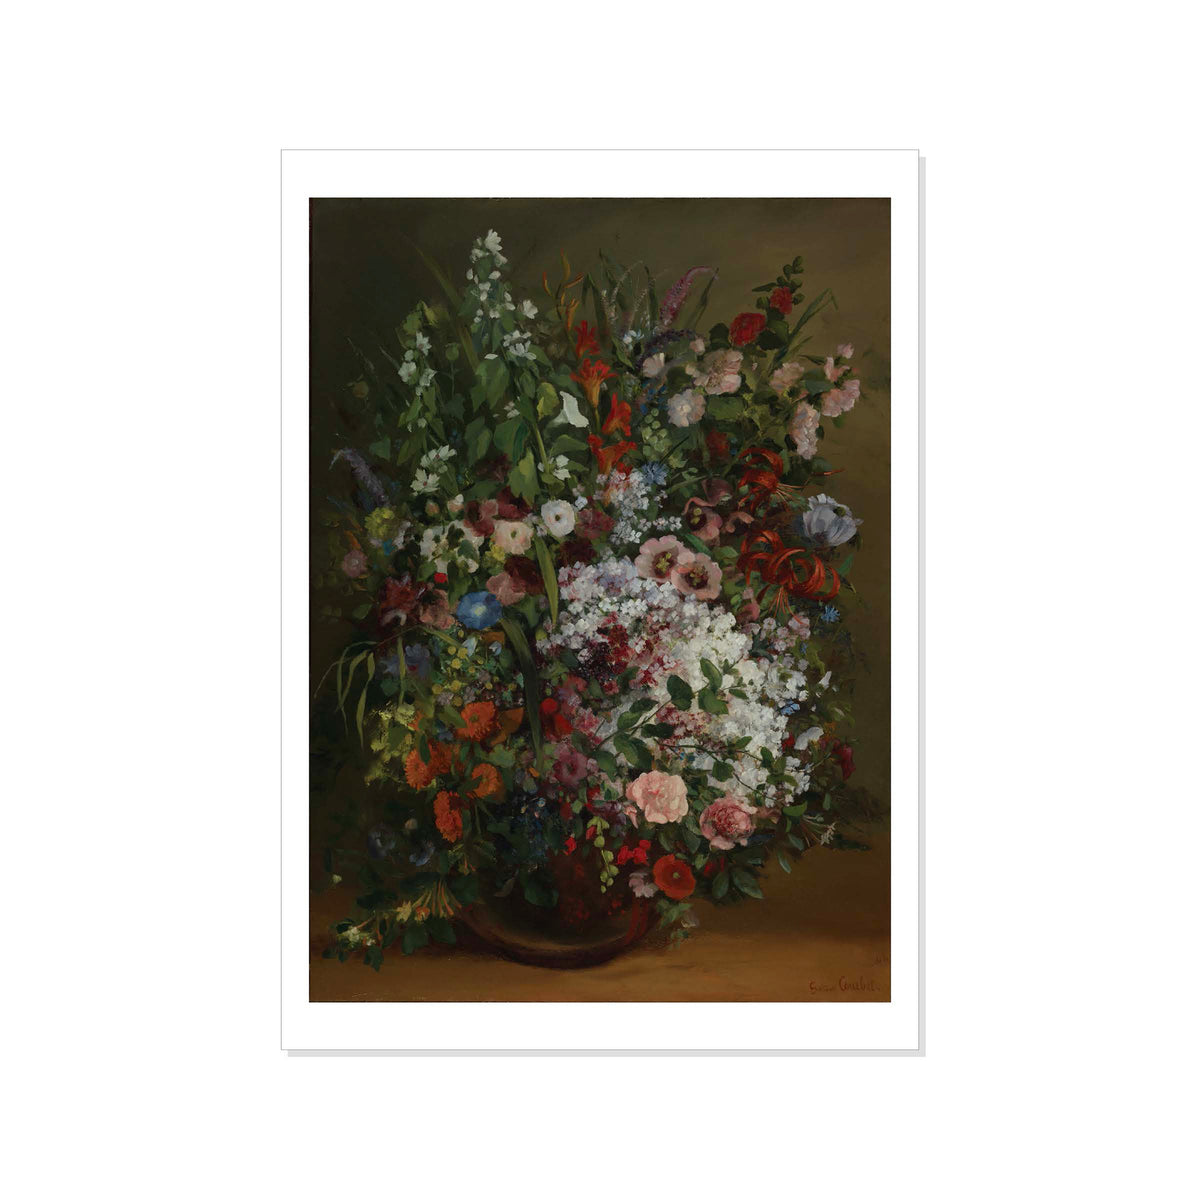 Courbet - Bouquet of Flowers in a Vase - Postcard